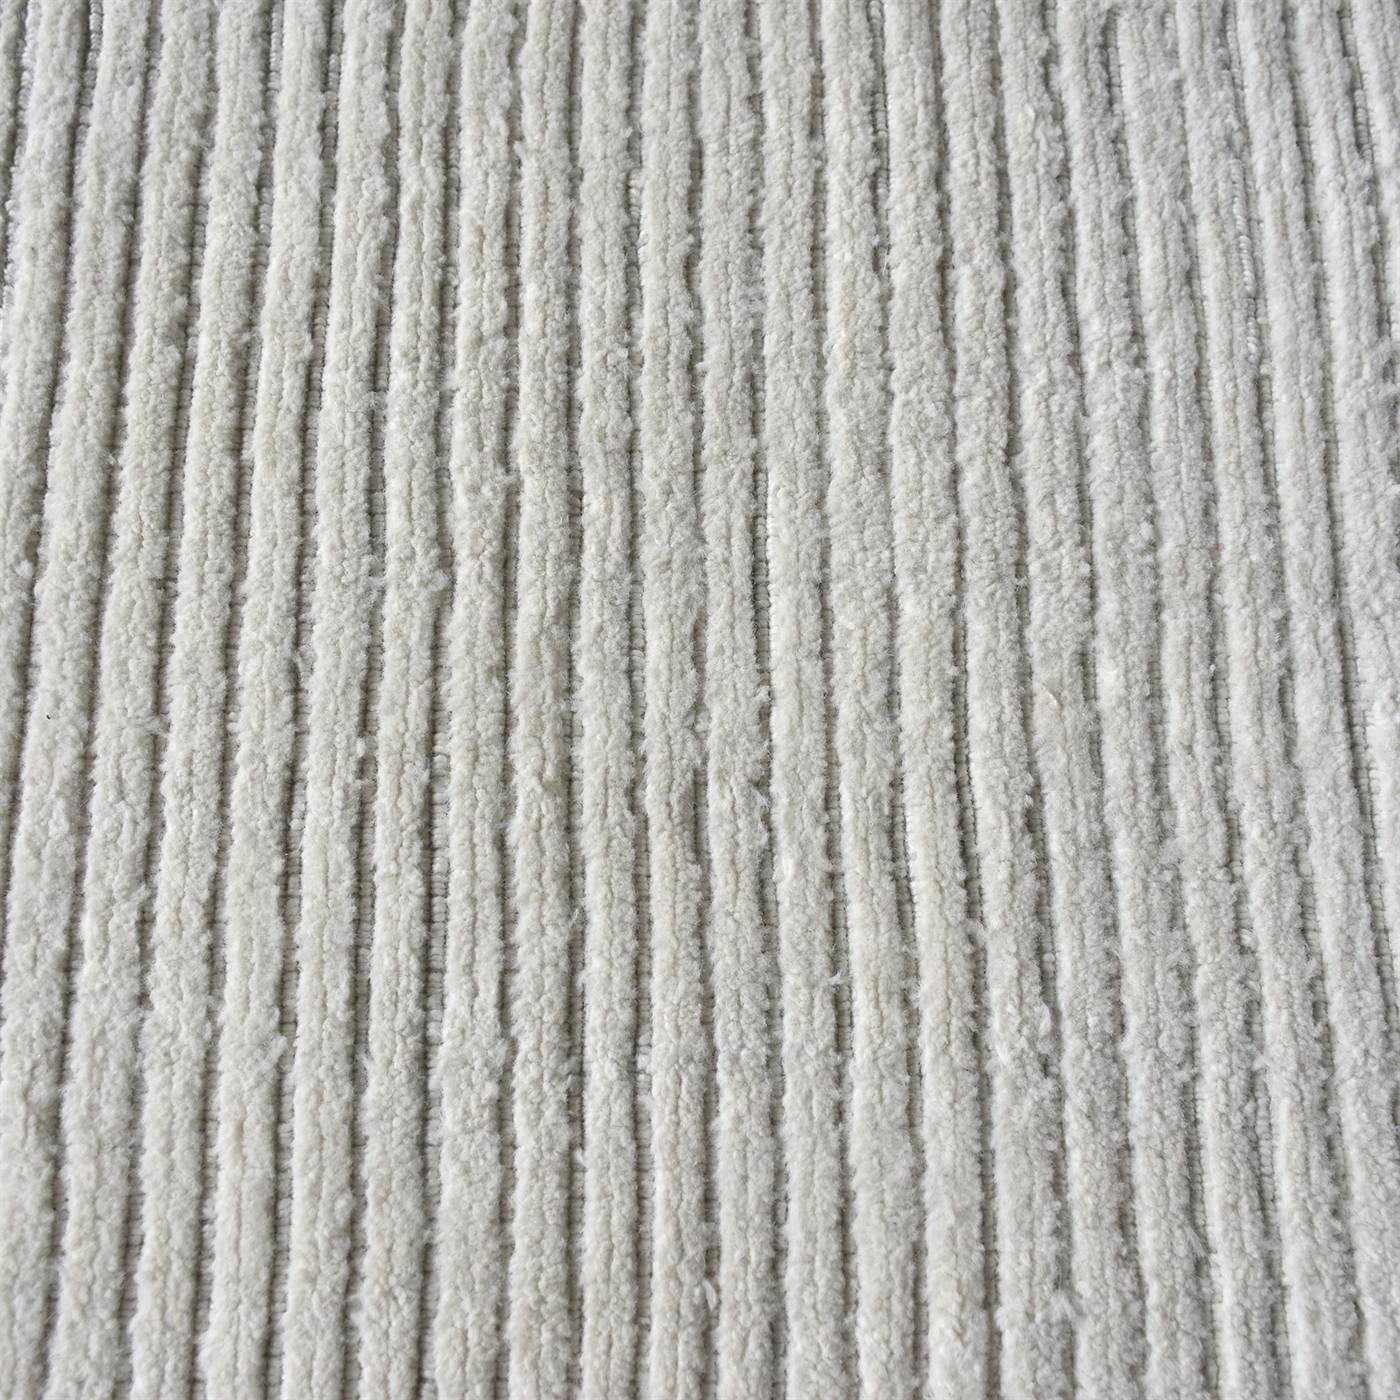 Area Rug, Bedroom Rug, Living Room Rug, Living Area Rug, Indian Rug, Office Carpet, Office Rug, Shop Rug Online, Natural White, Pet, Hand Woven , Handwoven, Cut And Loop , Intricate 